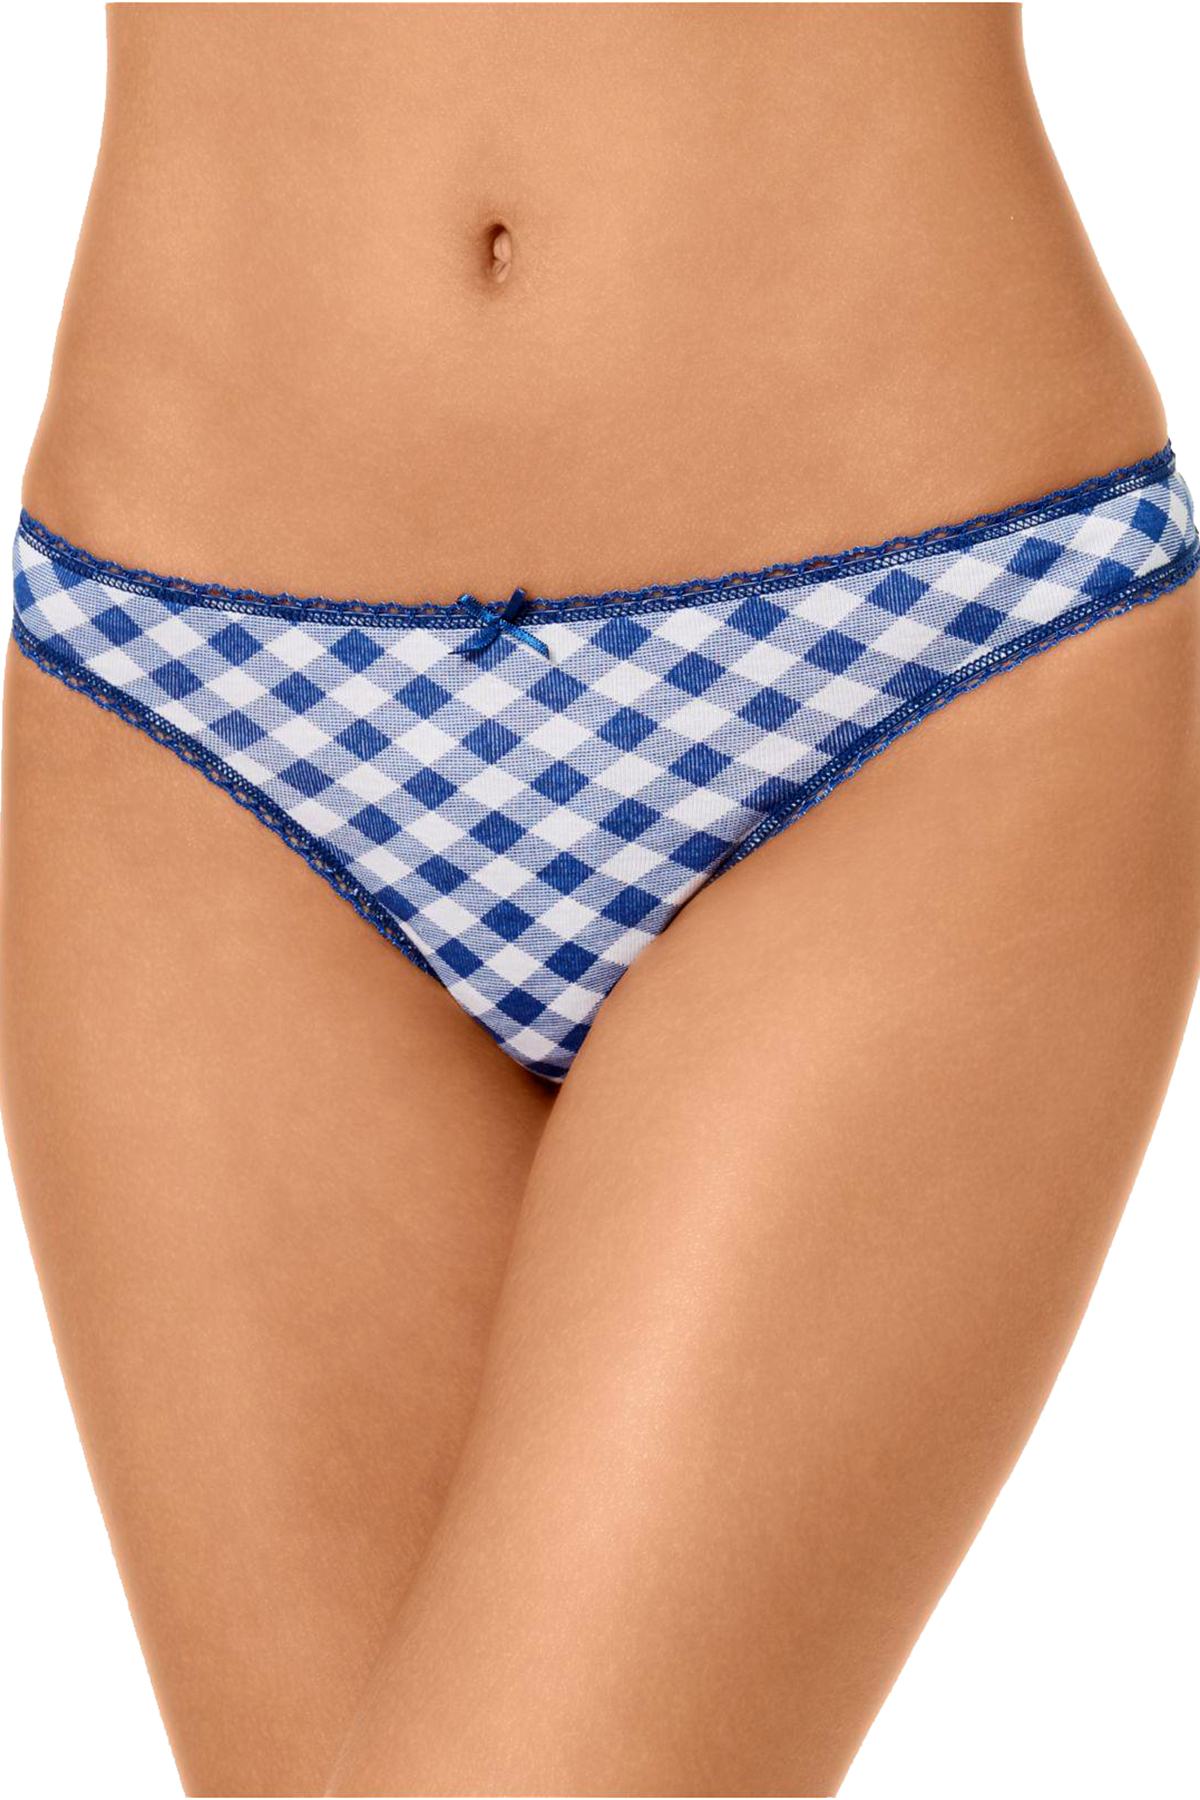 Charter Club Intimates Blue Gingham Thong